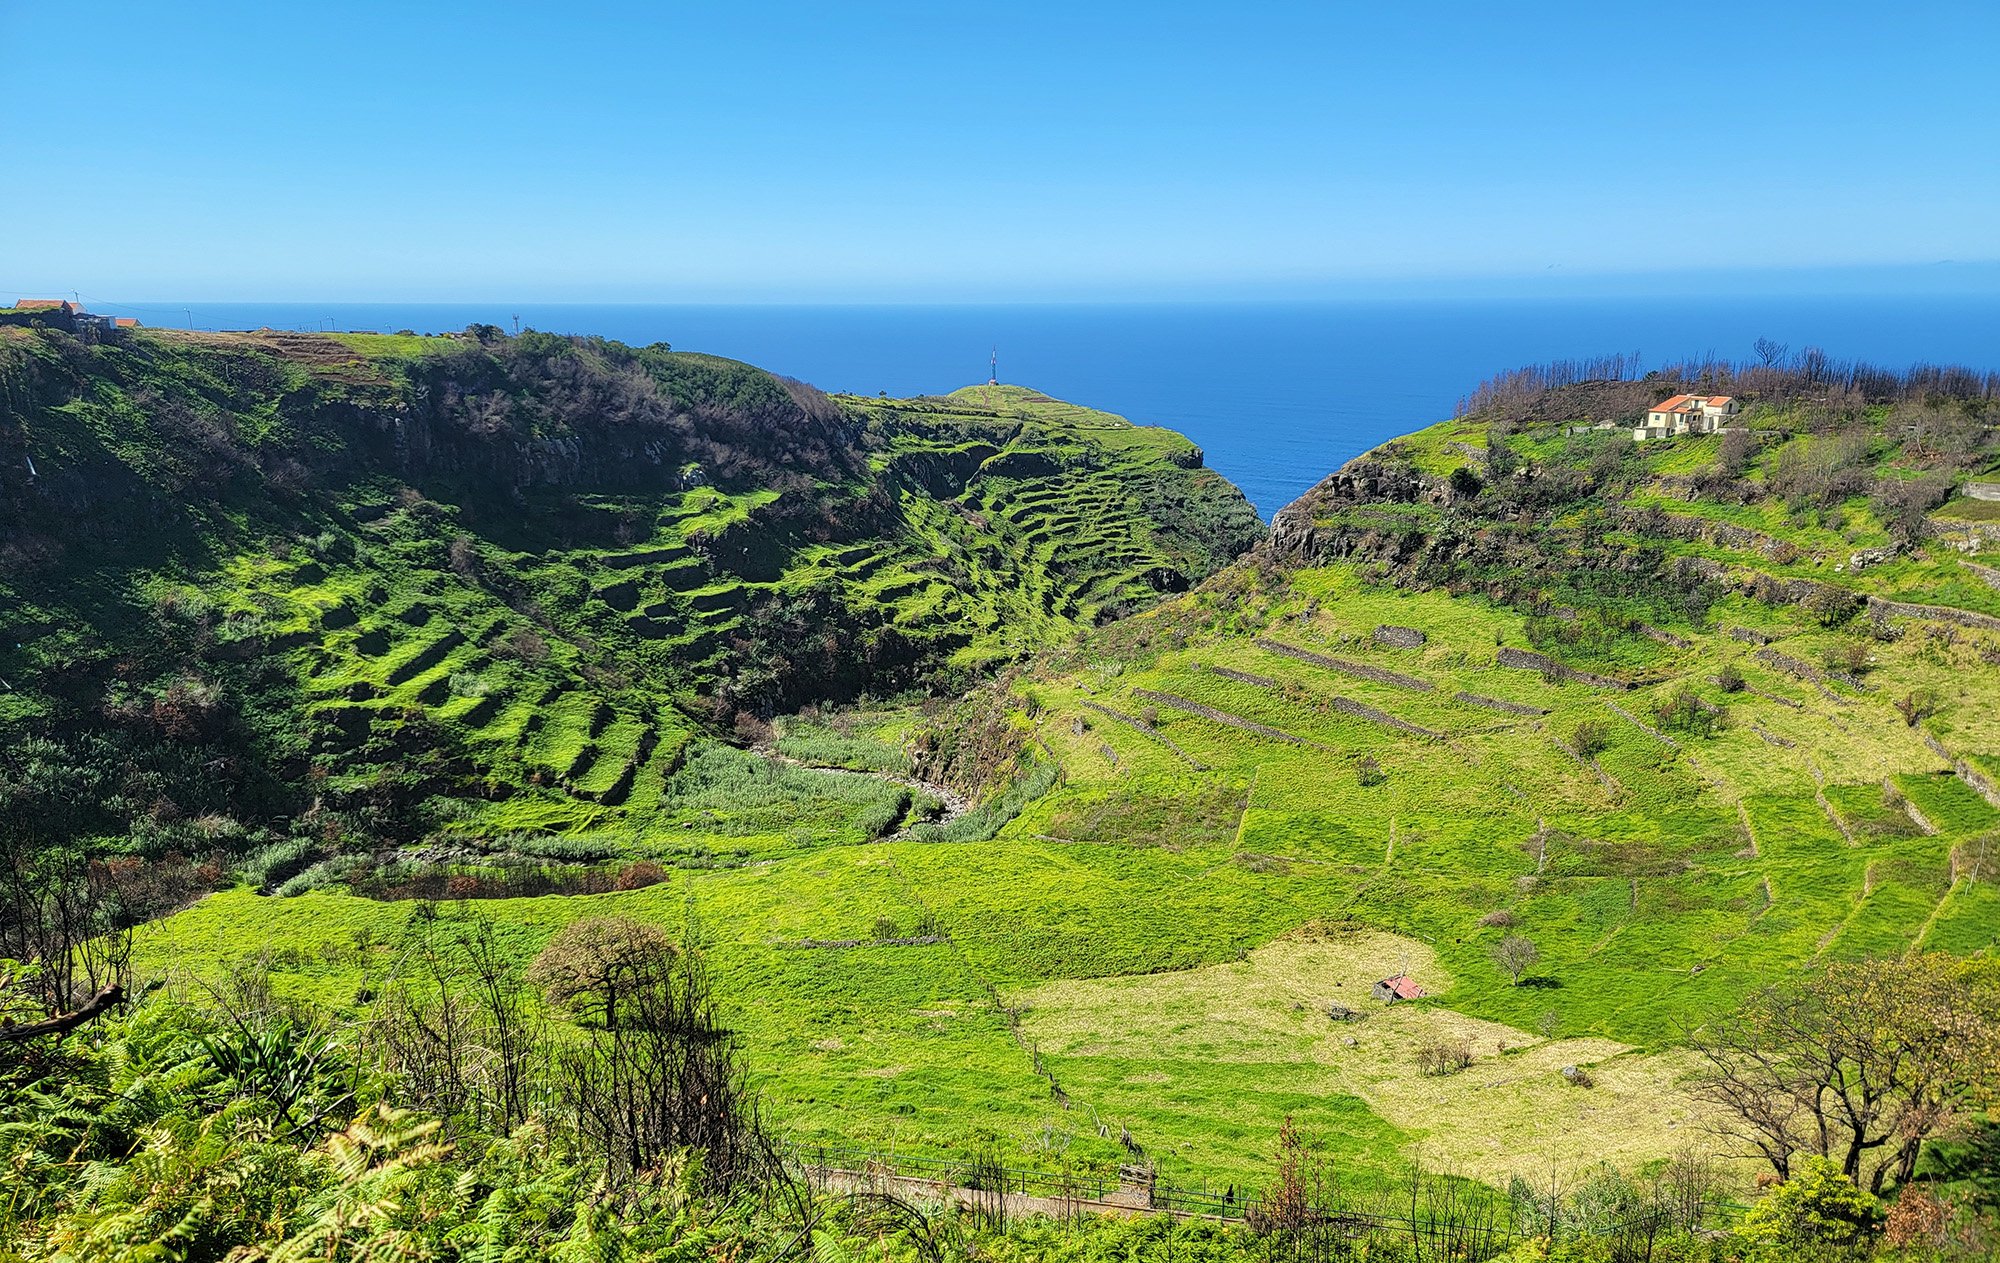 From Calheta you can finally escape the tunnel system and snake your way up the cliffs back towards the city. There's these beautiful terrace farms everywhere inland.